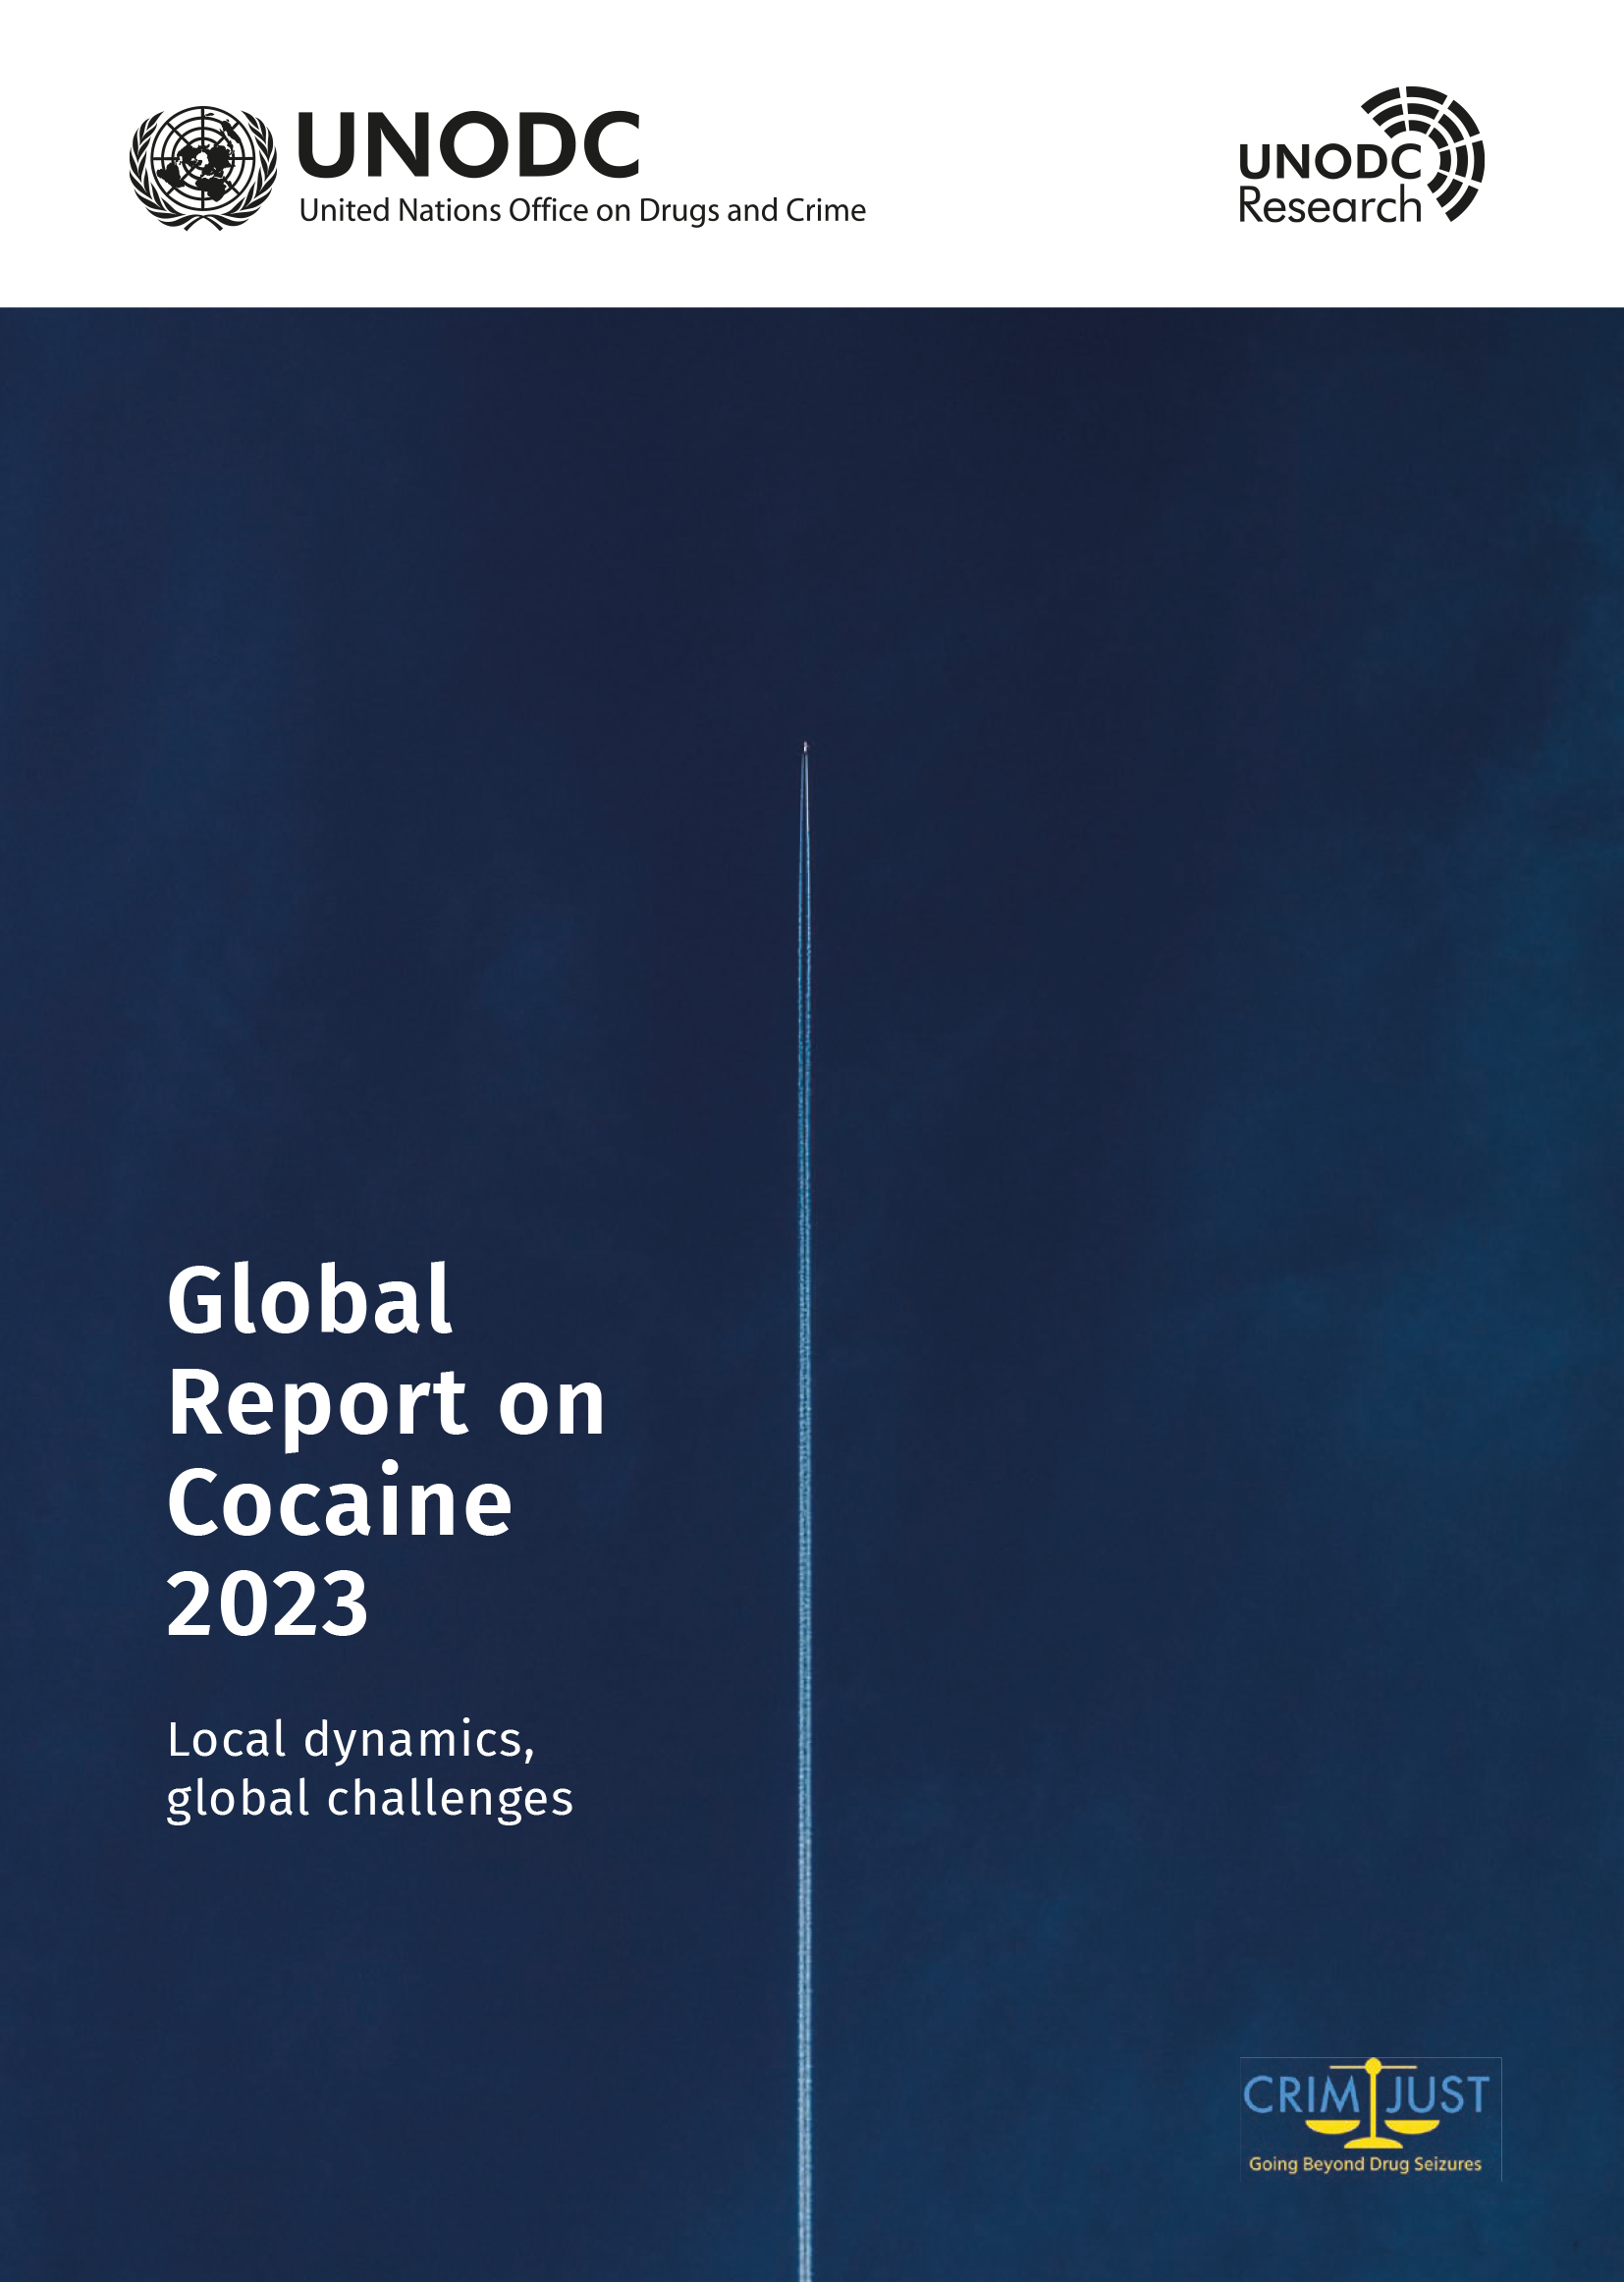 Cover of the Global Report on Cocaine 2023.